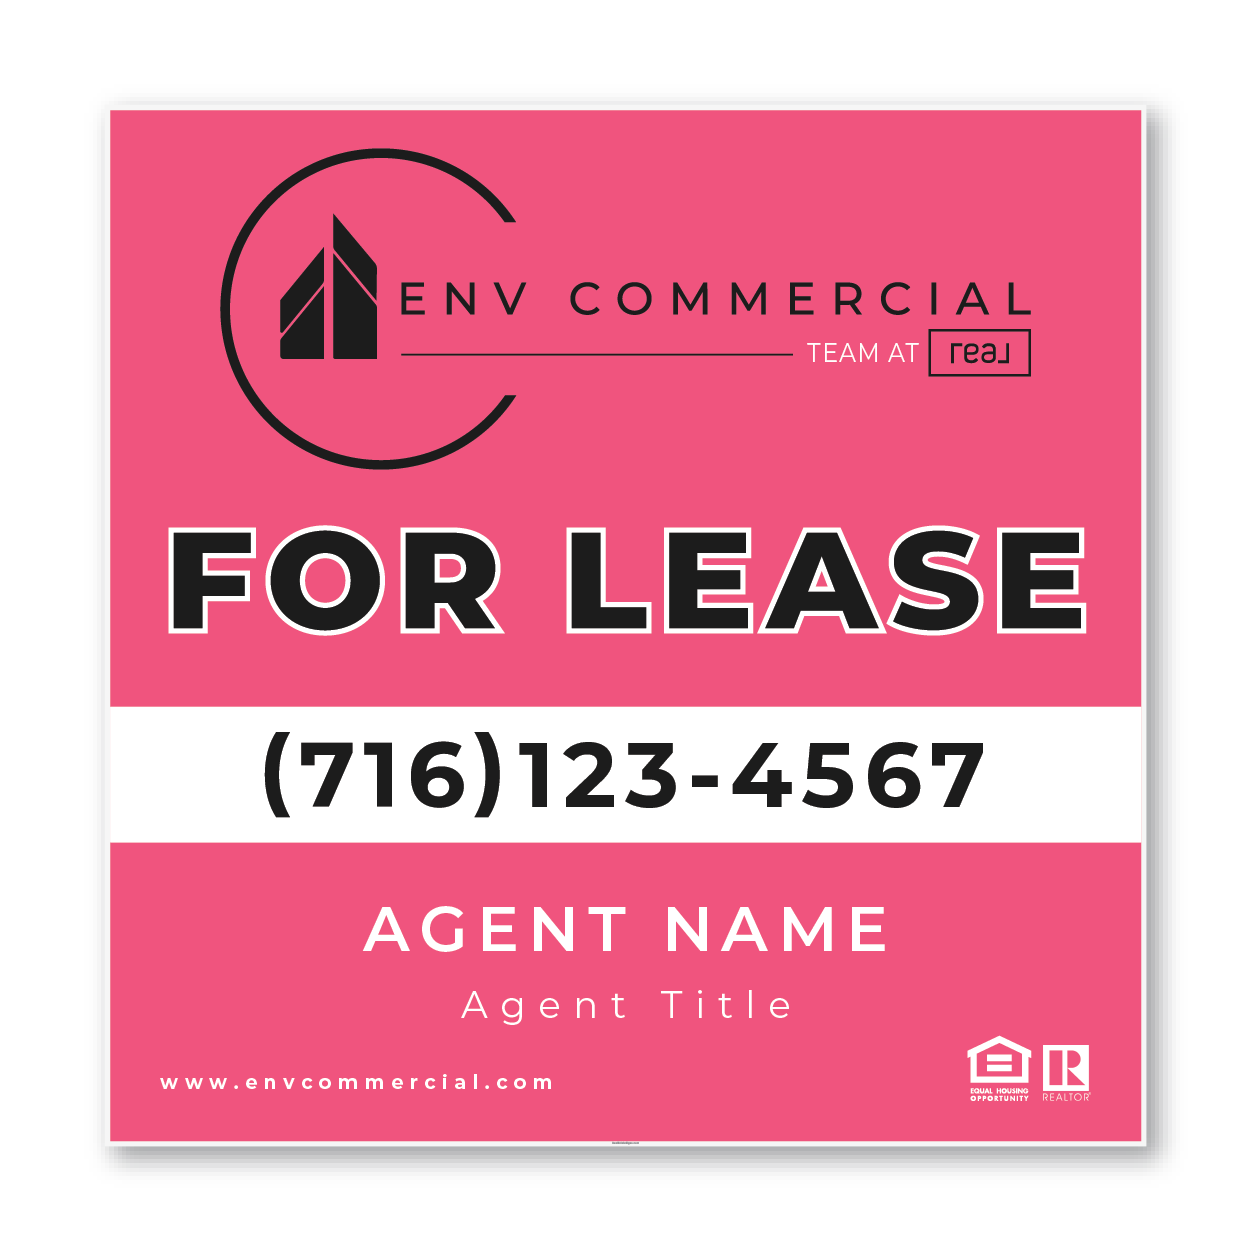 CM-1-4848-ENVC_at real--FOR LEASE